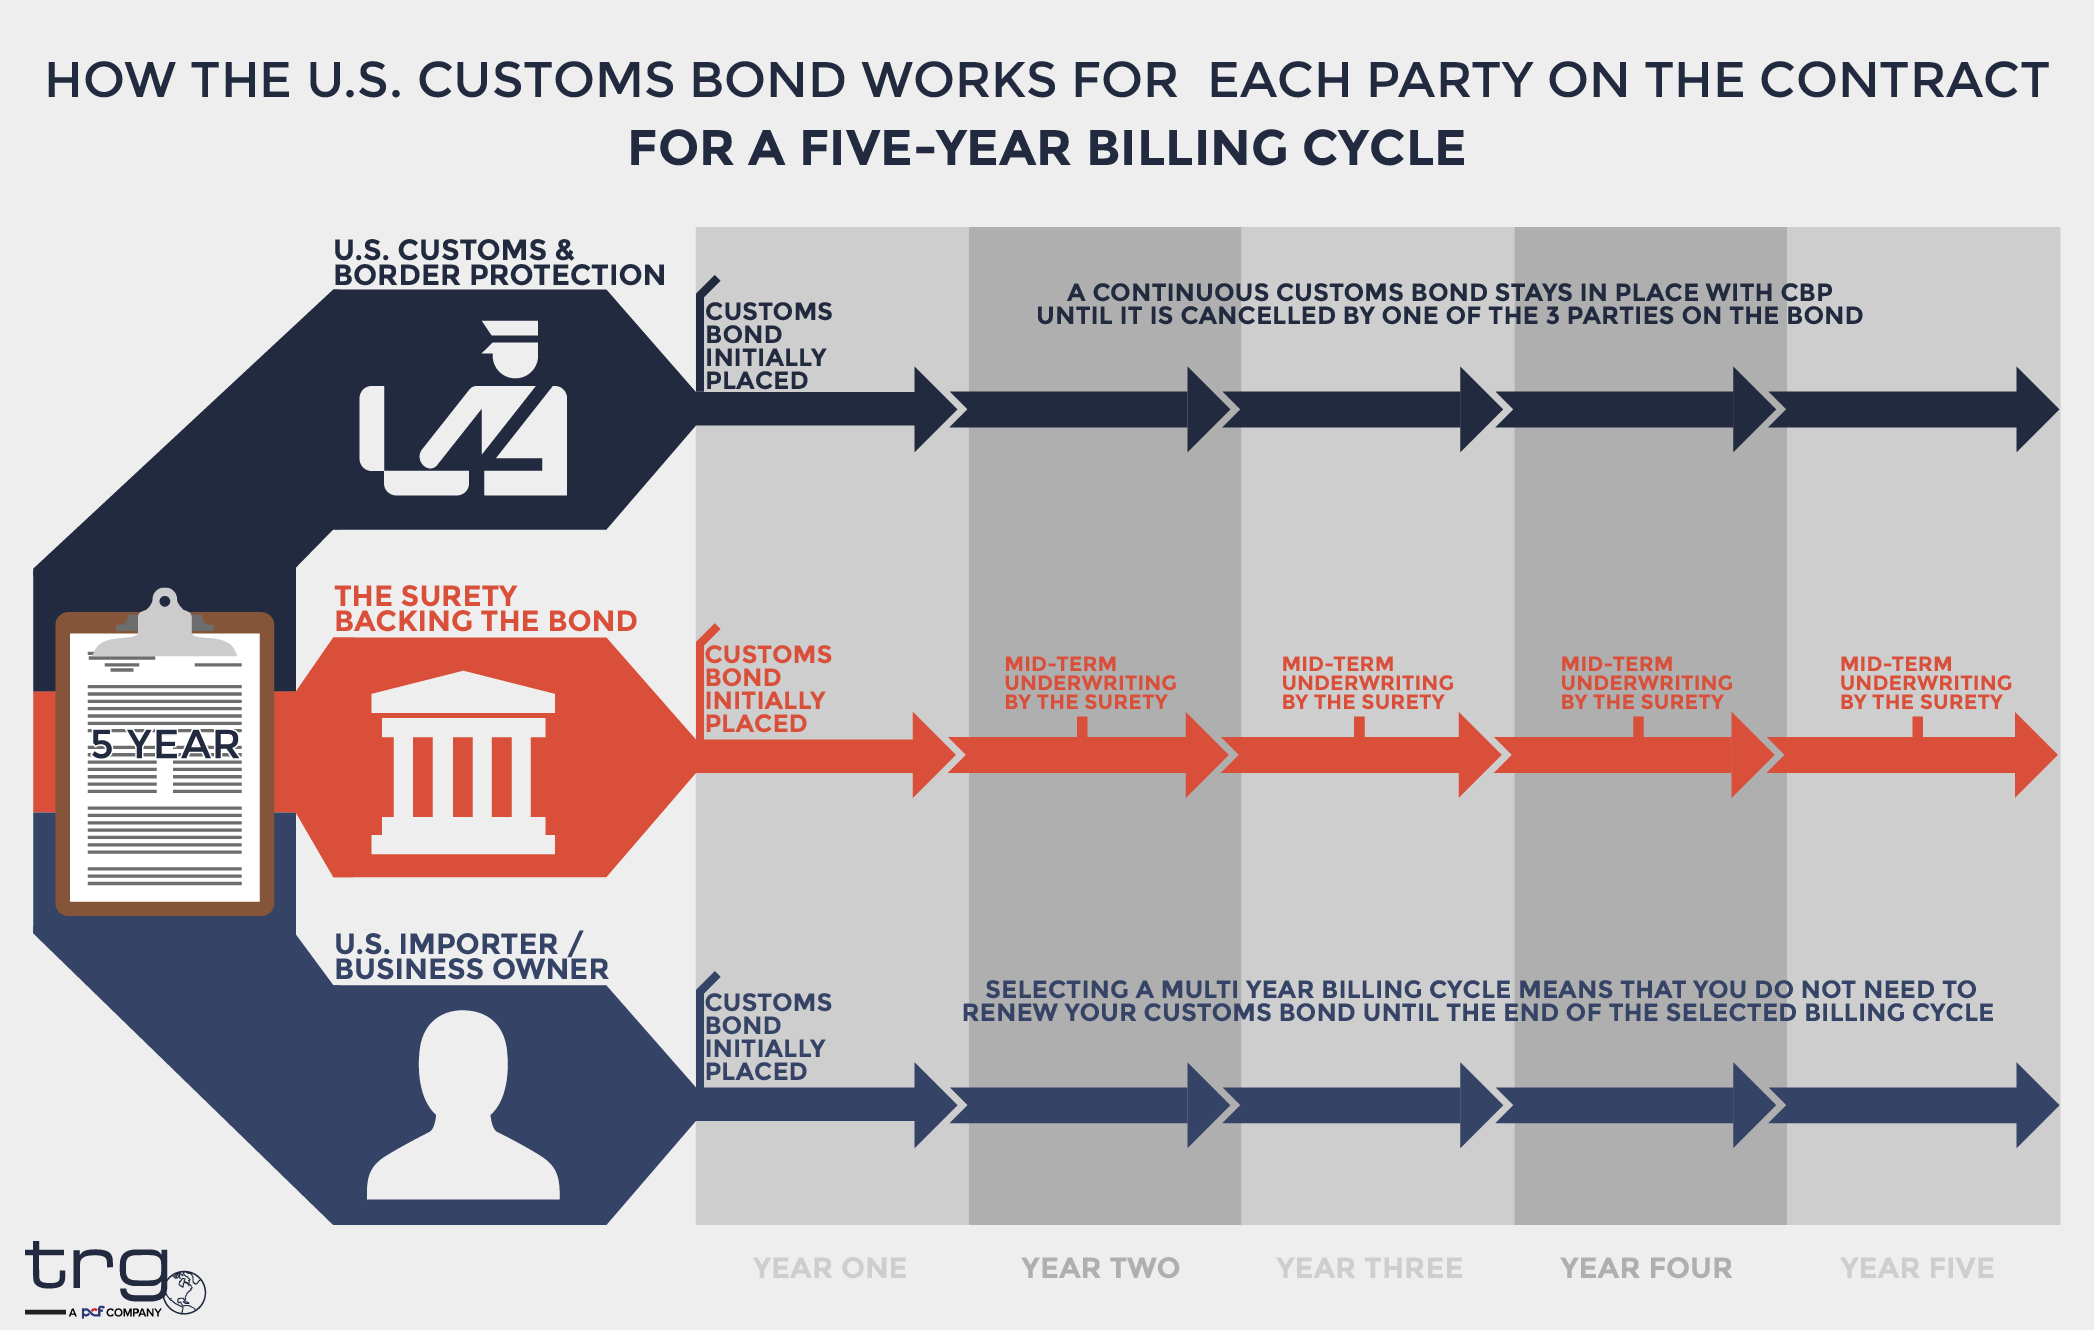 How the U.S. Customs bond works for each party on the contract for a 5-year billing cycle.